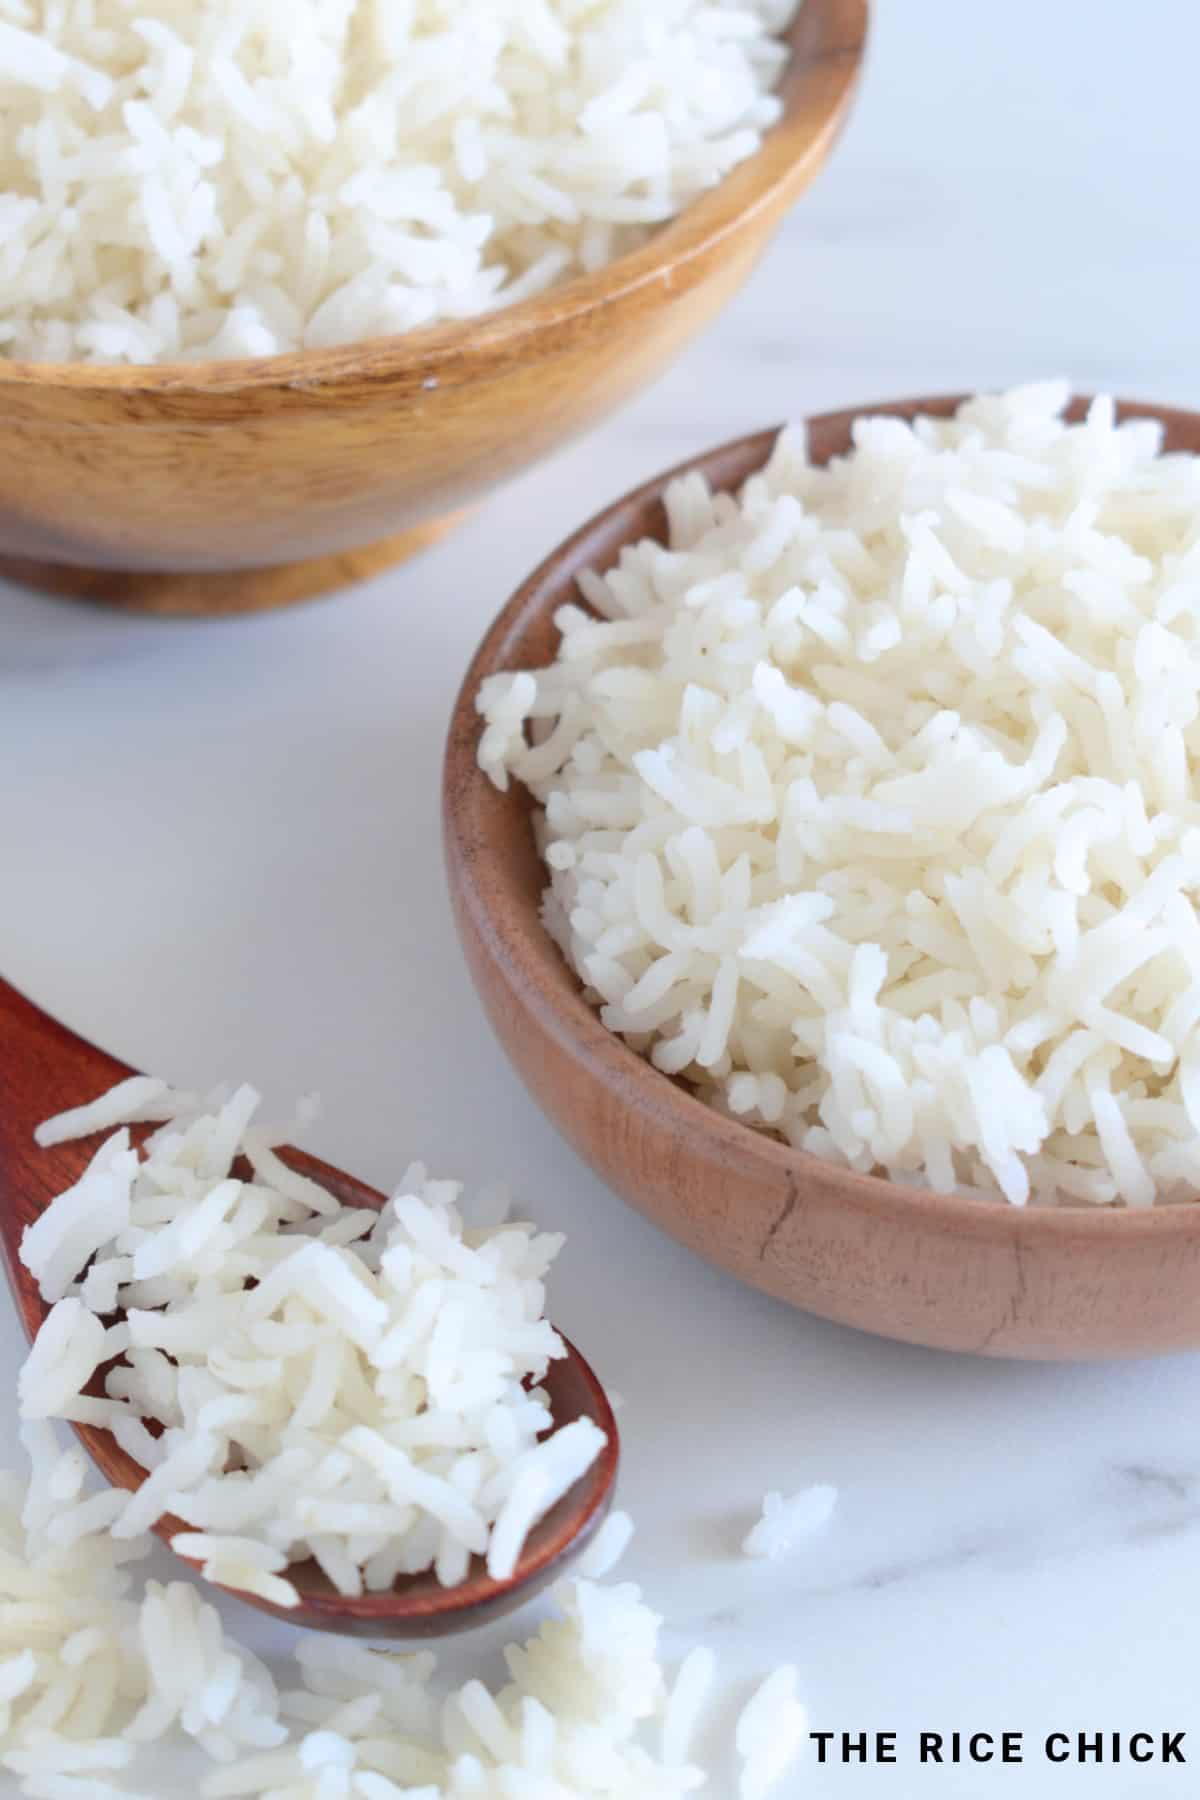 Cooked basmati rice in wooden bowls, and a wooden spoon with basmati rice on it.